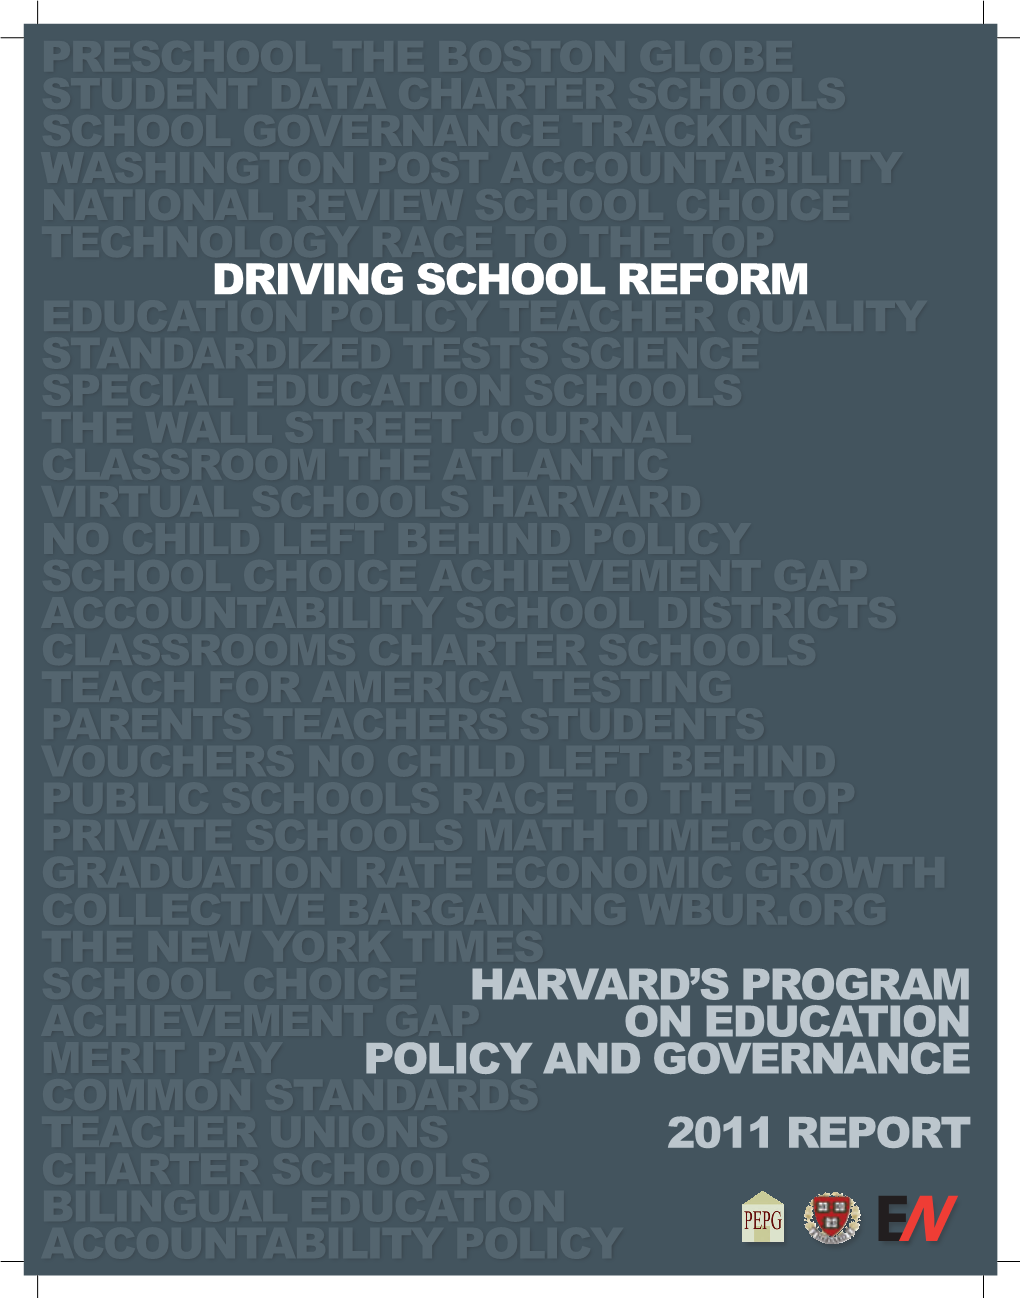 Harvard's Program on Education Policy and Governance 2011 Report Driving School Reform